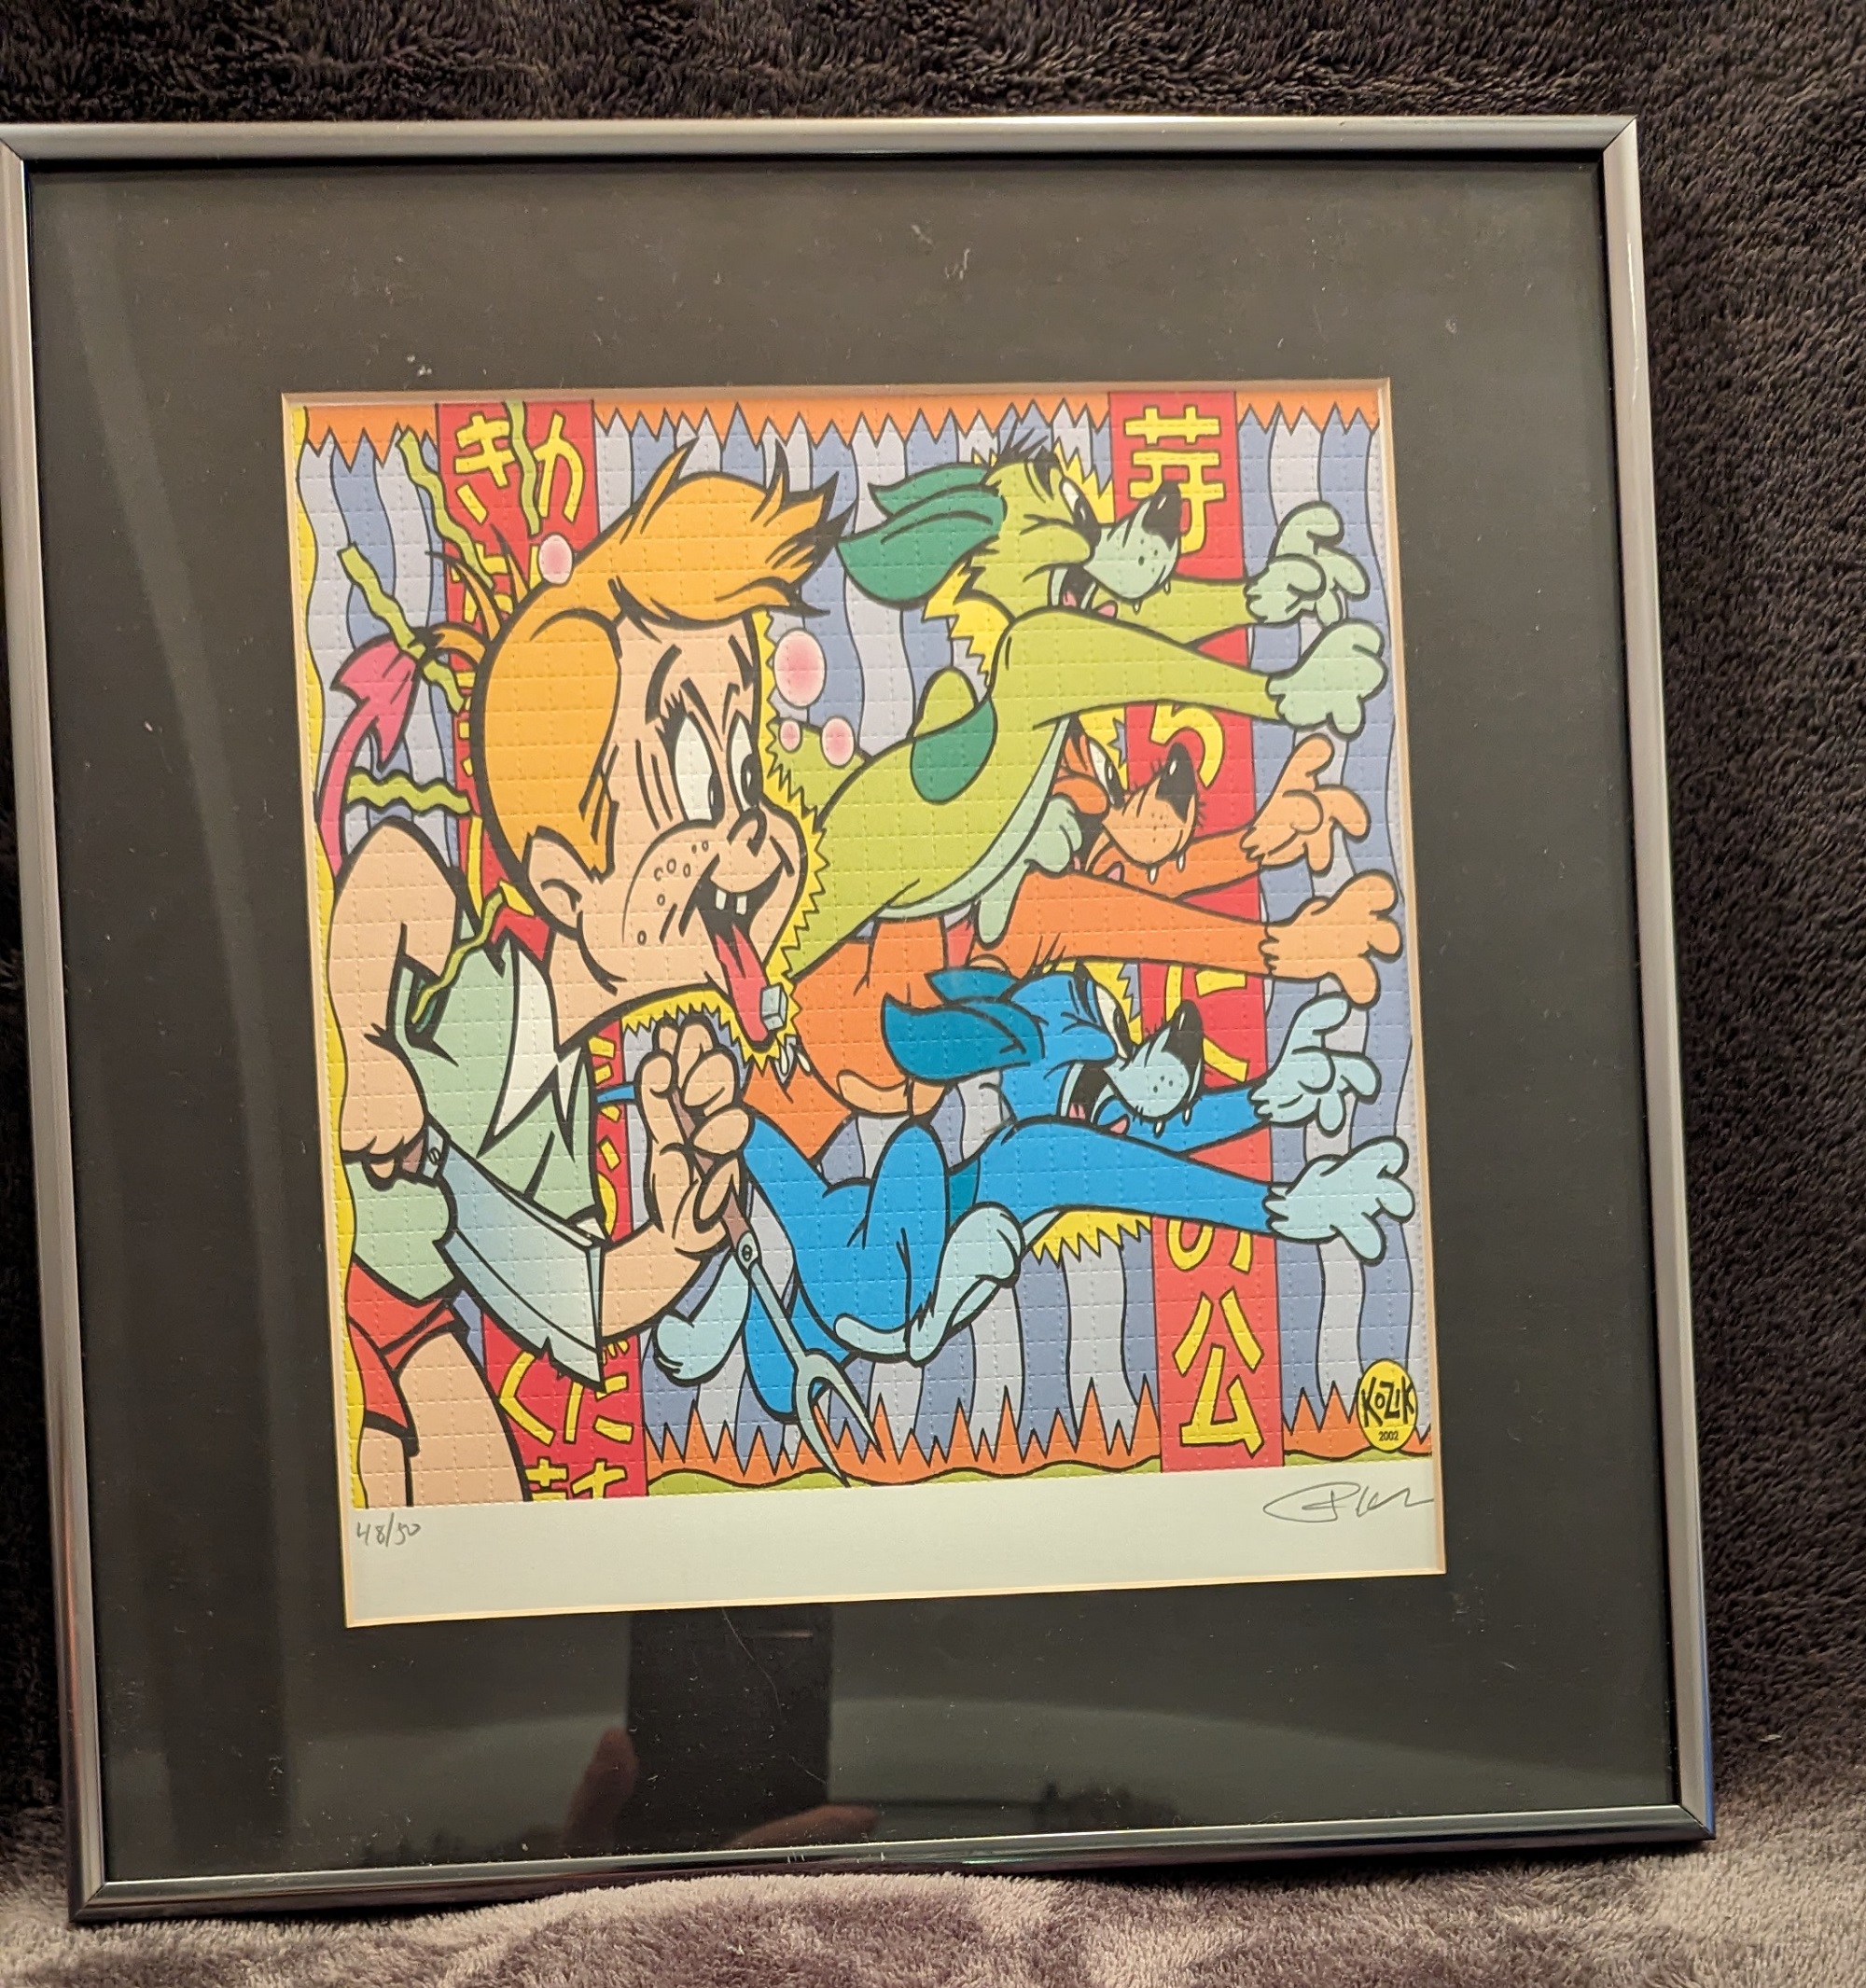 Just an example of how cool this Signed Blotter looks when it's framed.